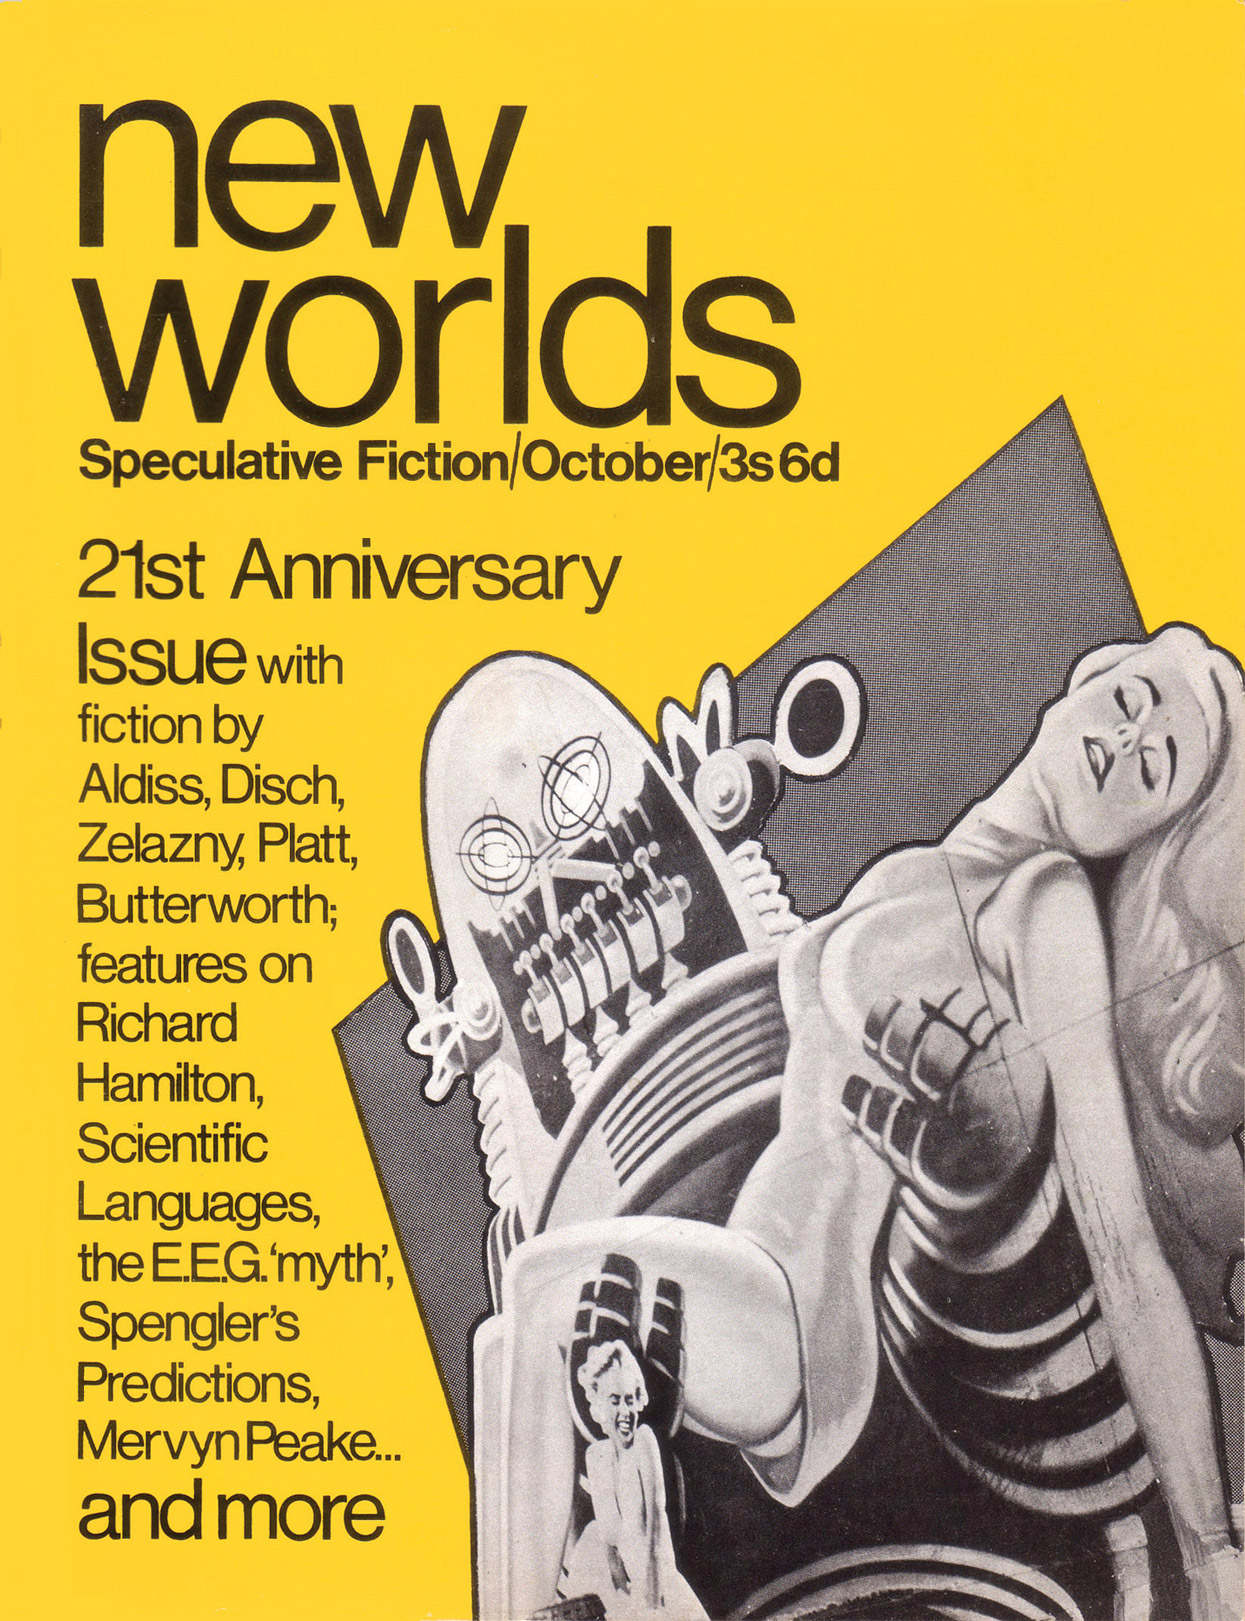 The cover of the October nineteen sixty seven issue of New Worlds, depicting an illustration of a robot carrying a distressed woman, along with a list of contributor names.